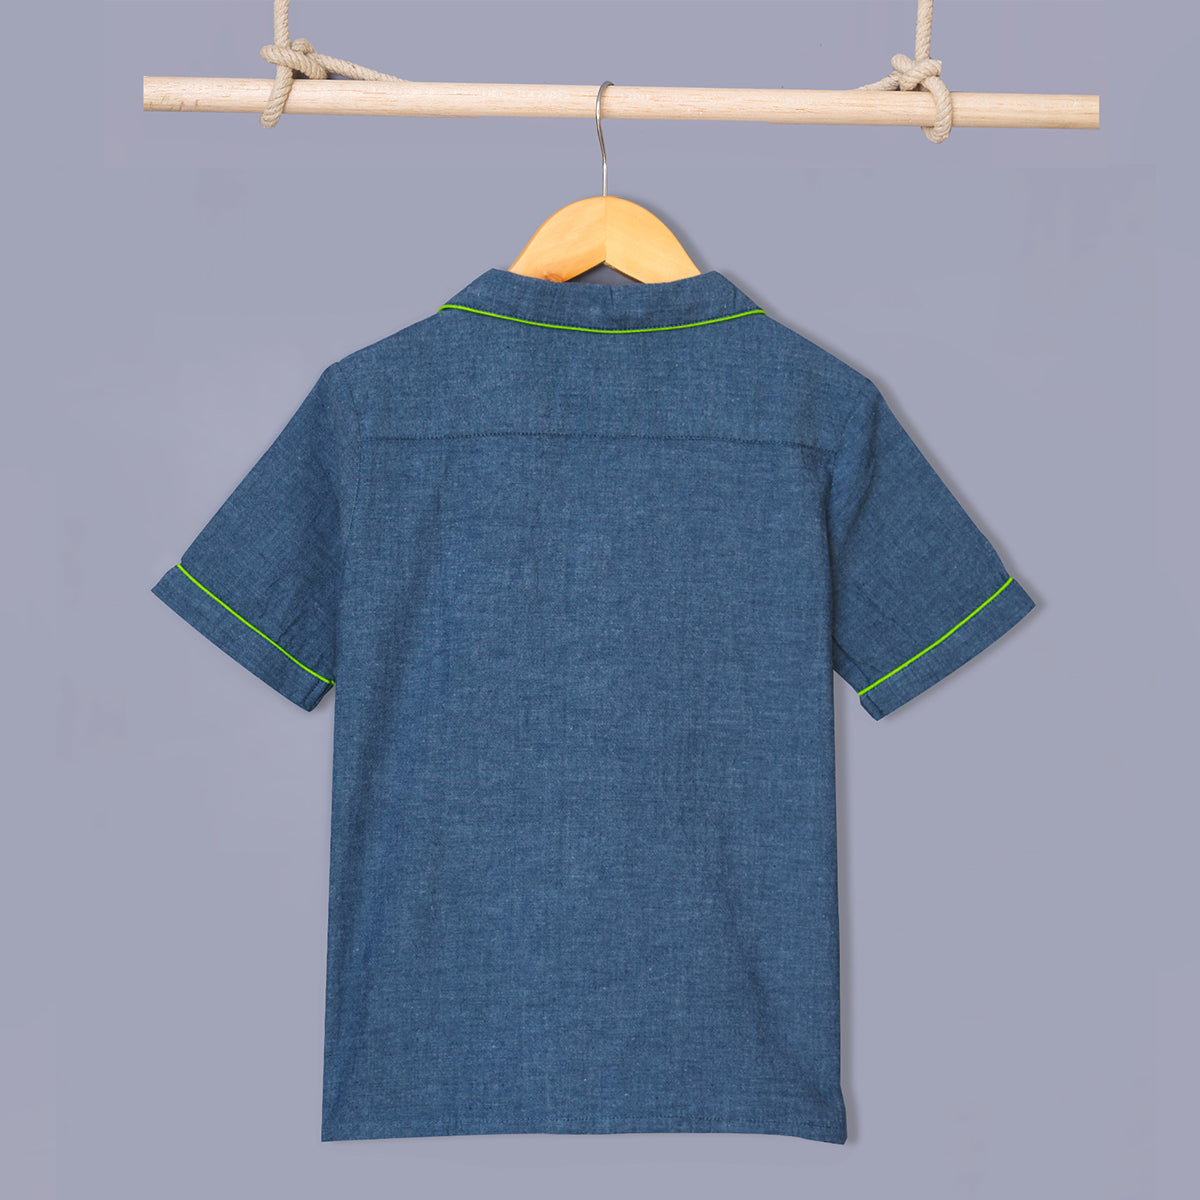 Notched Collared Sleepsuit for Boys in Chambray Blue